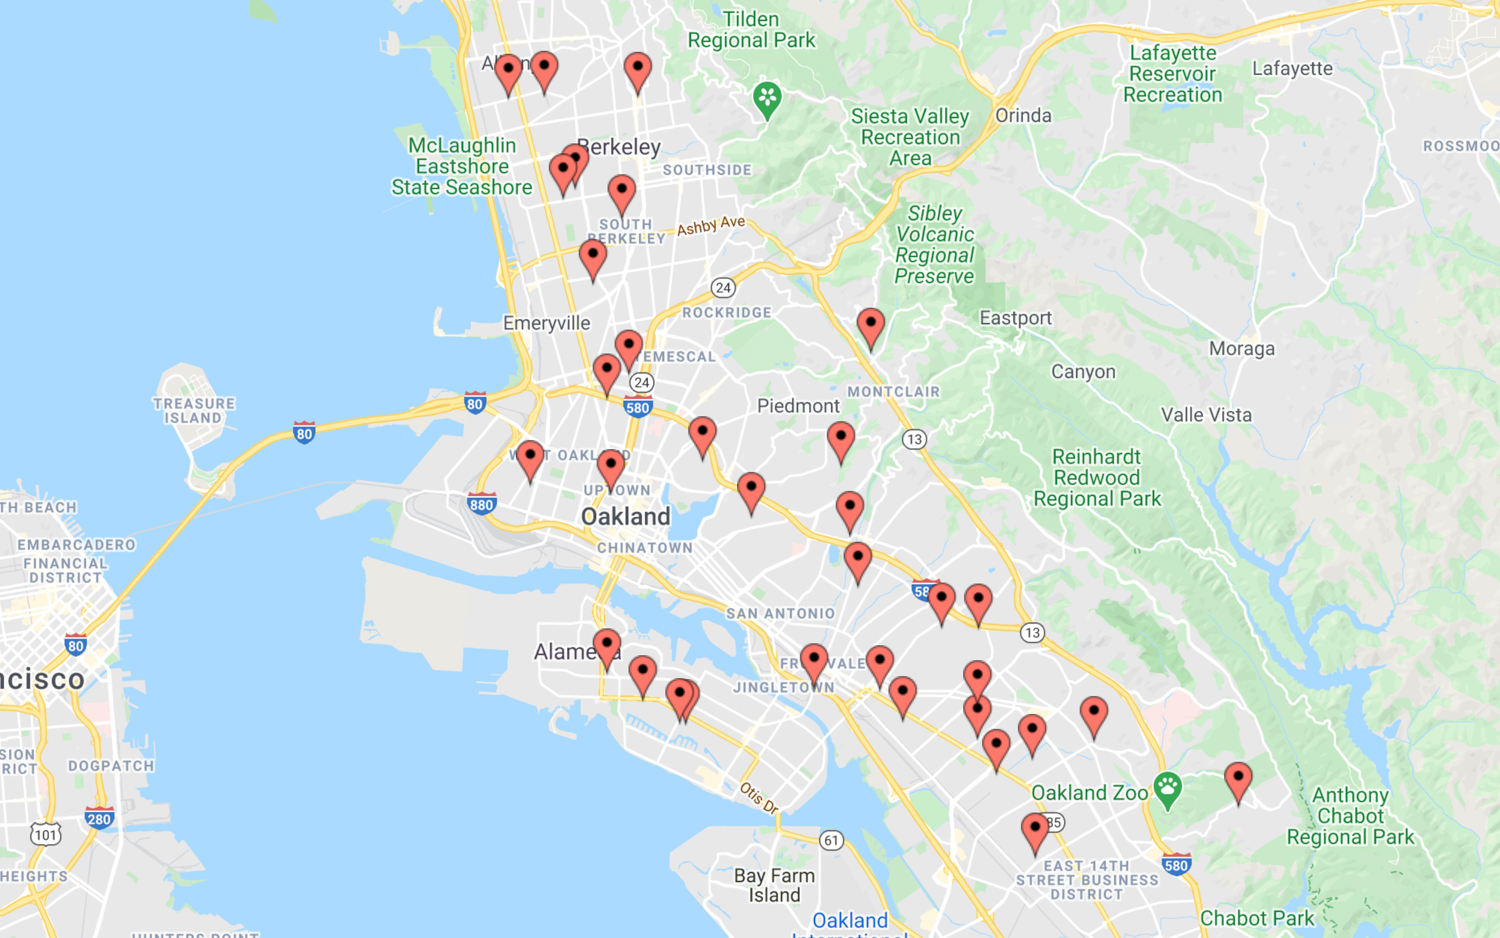 Permits covered in this article in Alameda, Berkeley, and Oakland, image created by Easy Map Maker